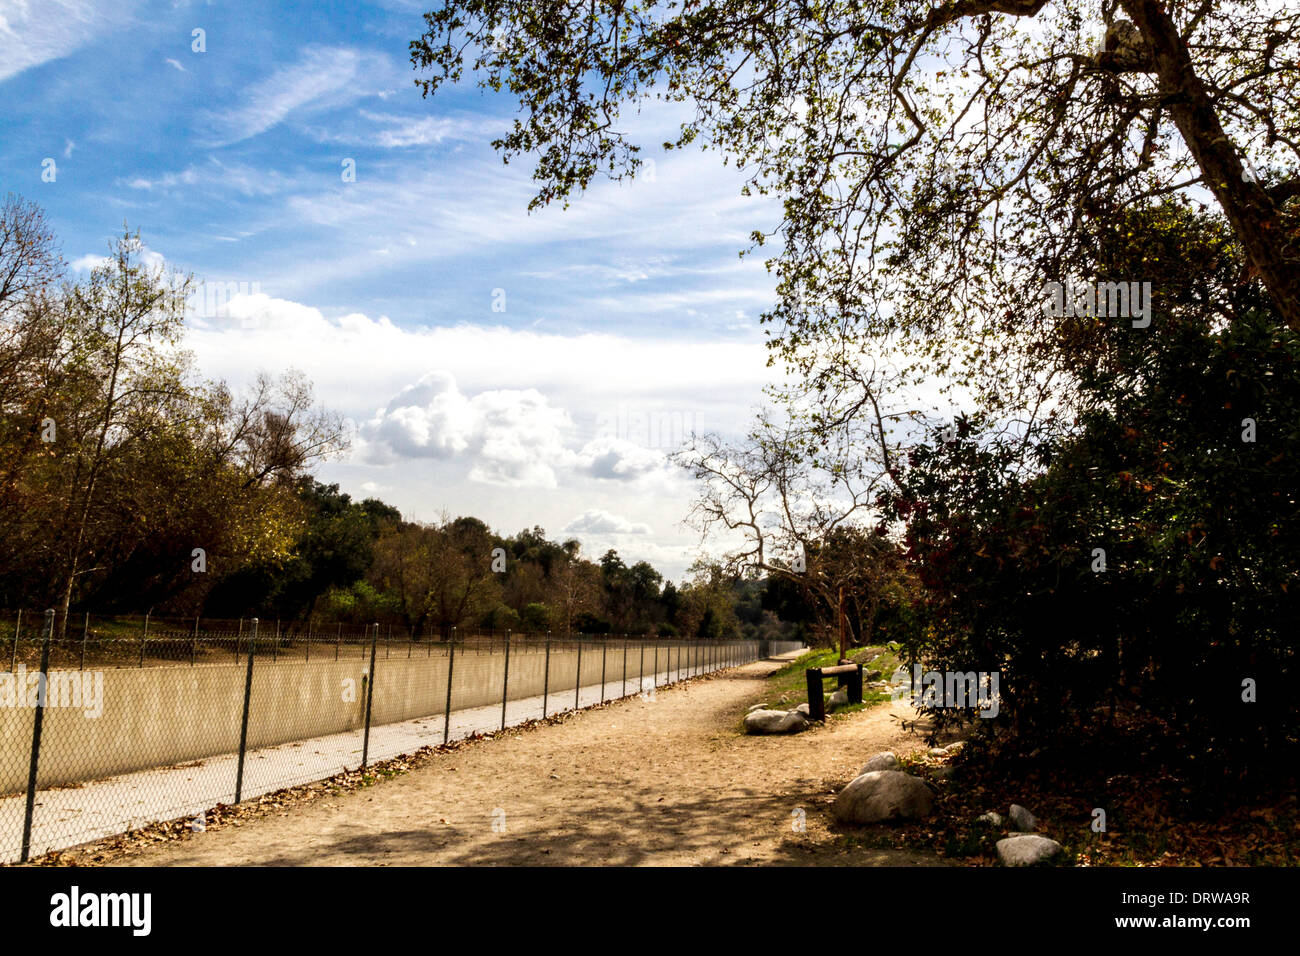 The concrete channel that contains the Arroyo Seco waterway in Pasadena California with the Arroyo hiking trail foreground Stock Photo